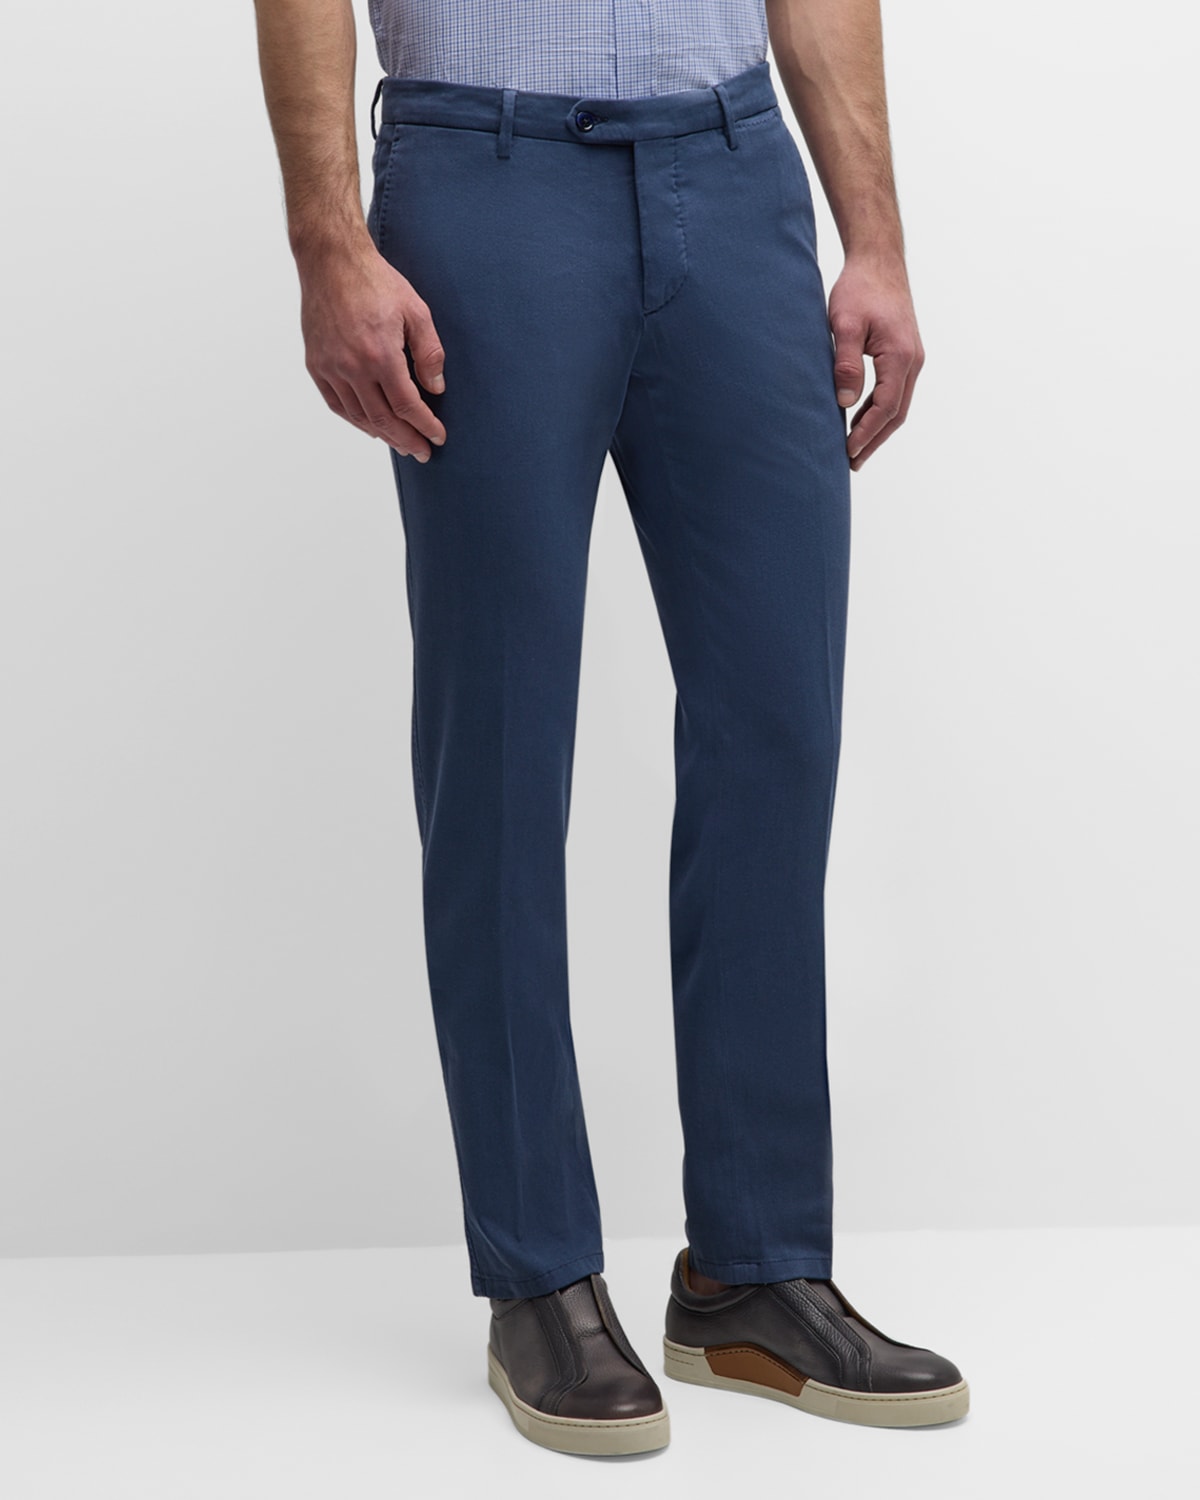 Men's Luxe Stretch Twill Chino Pants